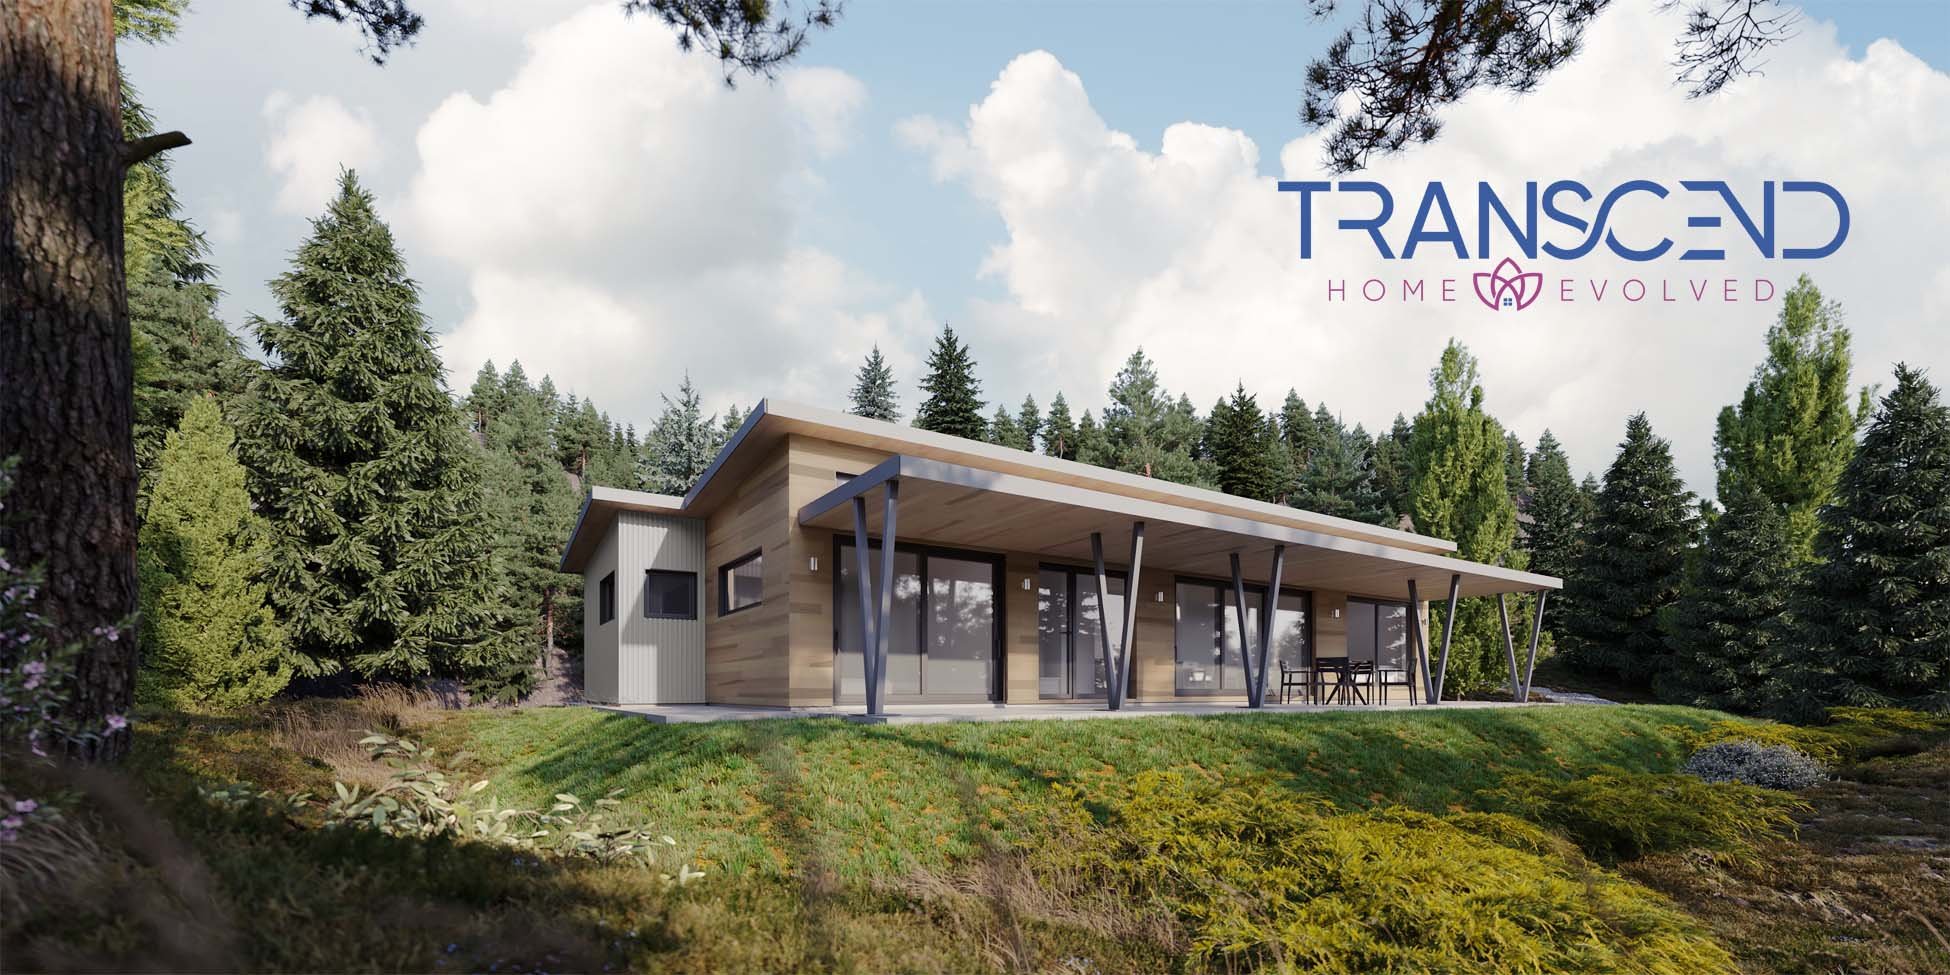 Transcend_demo_home_rendering with logo featured